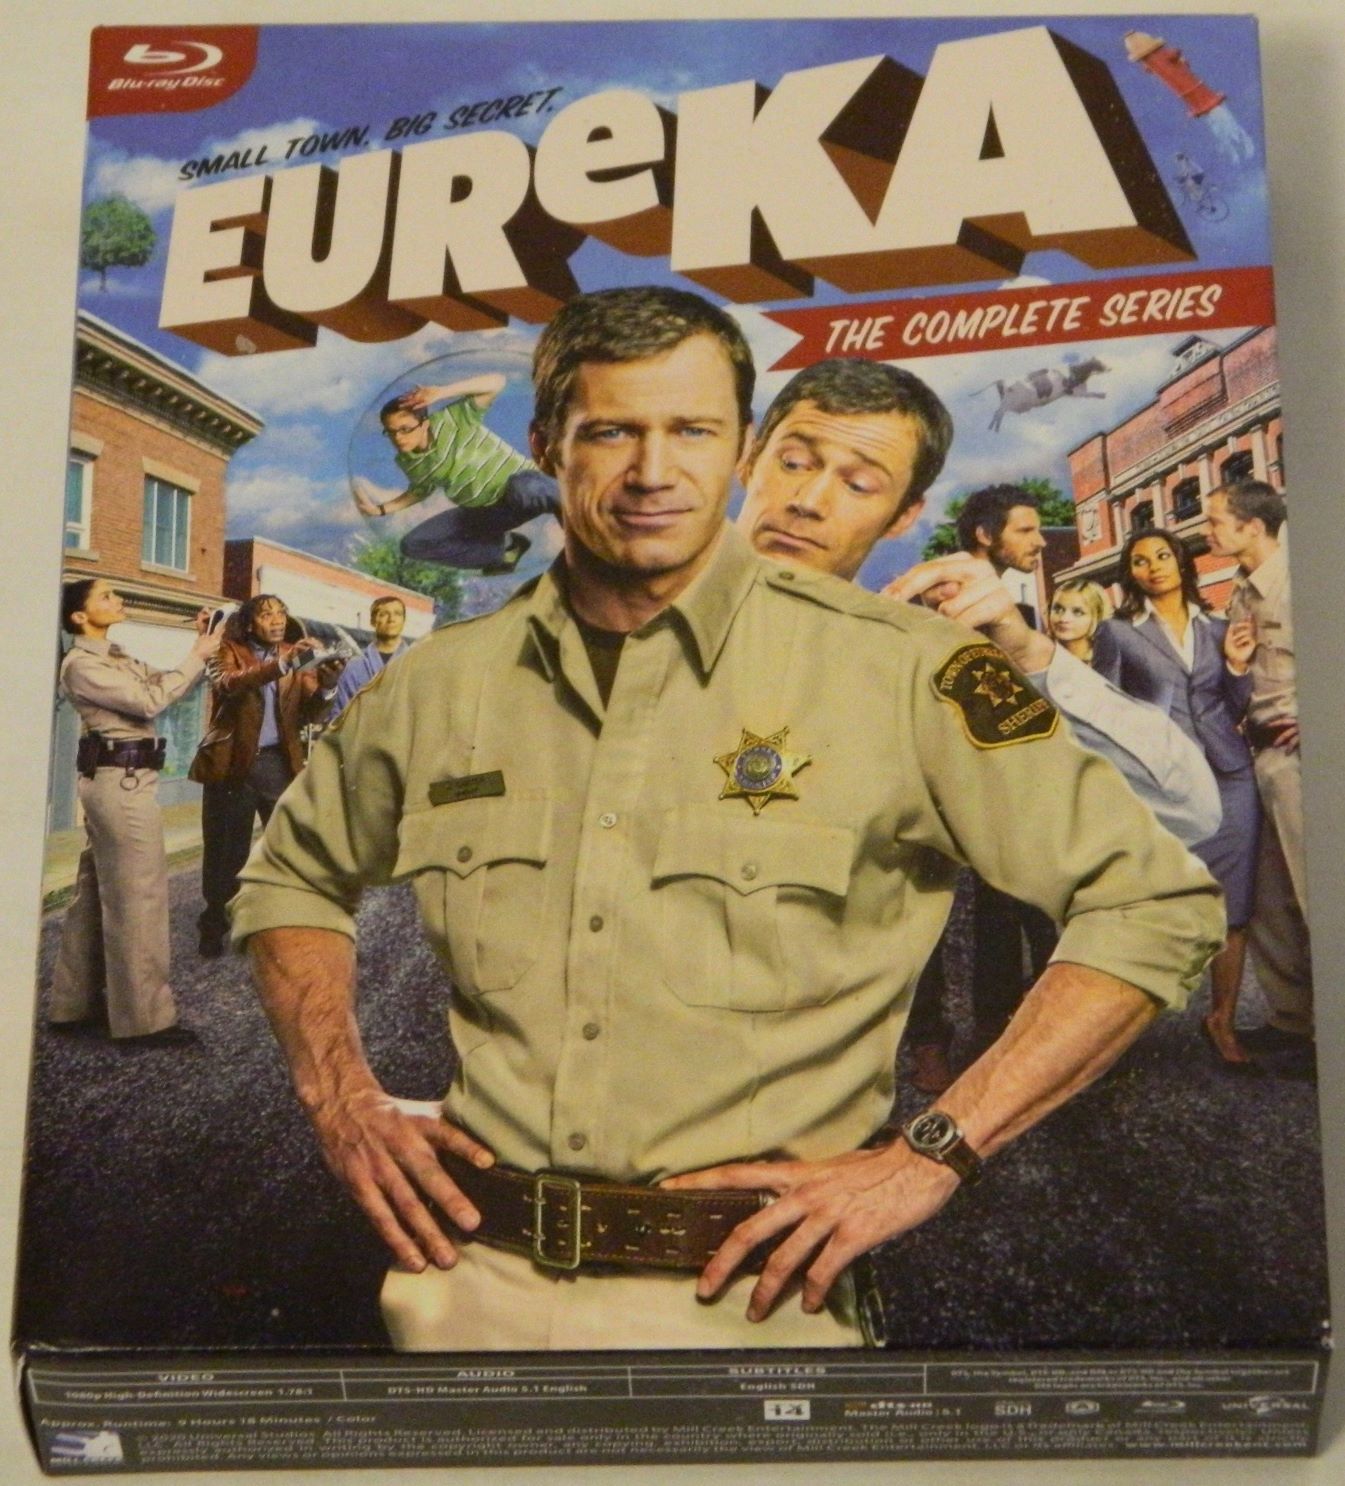 Eureka: The Complete Series Blu-ray Review